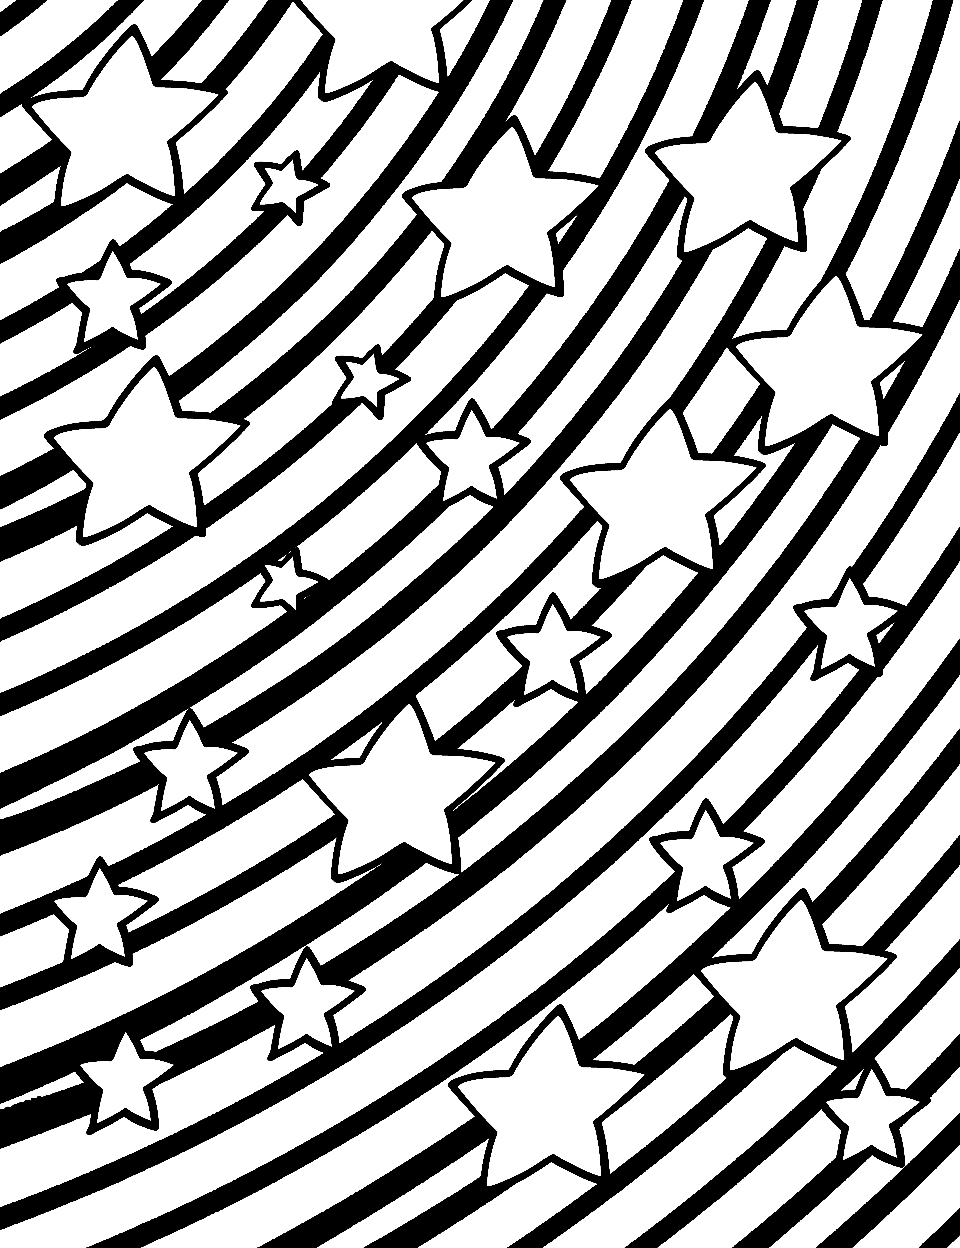 Artistic Star Splash Coloring Page - A creative, abstract arrangement of stars with artistic patterns.